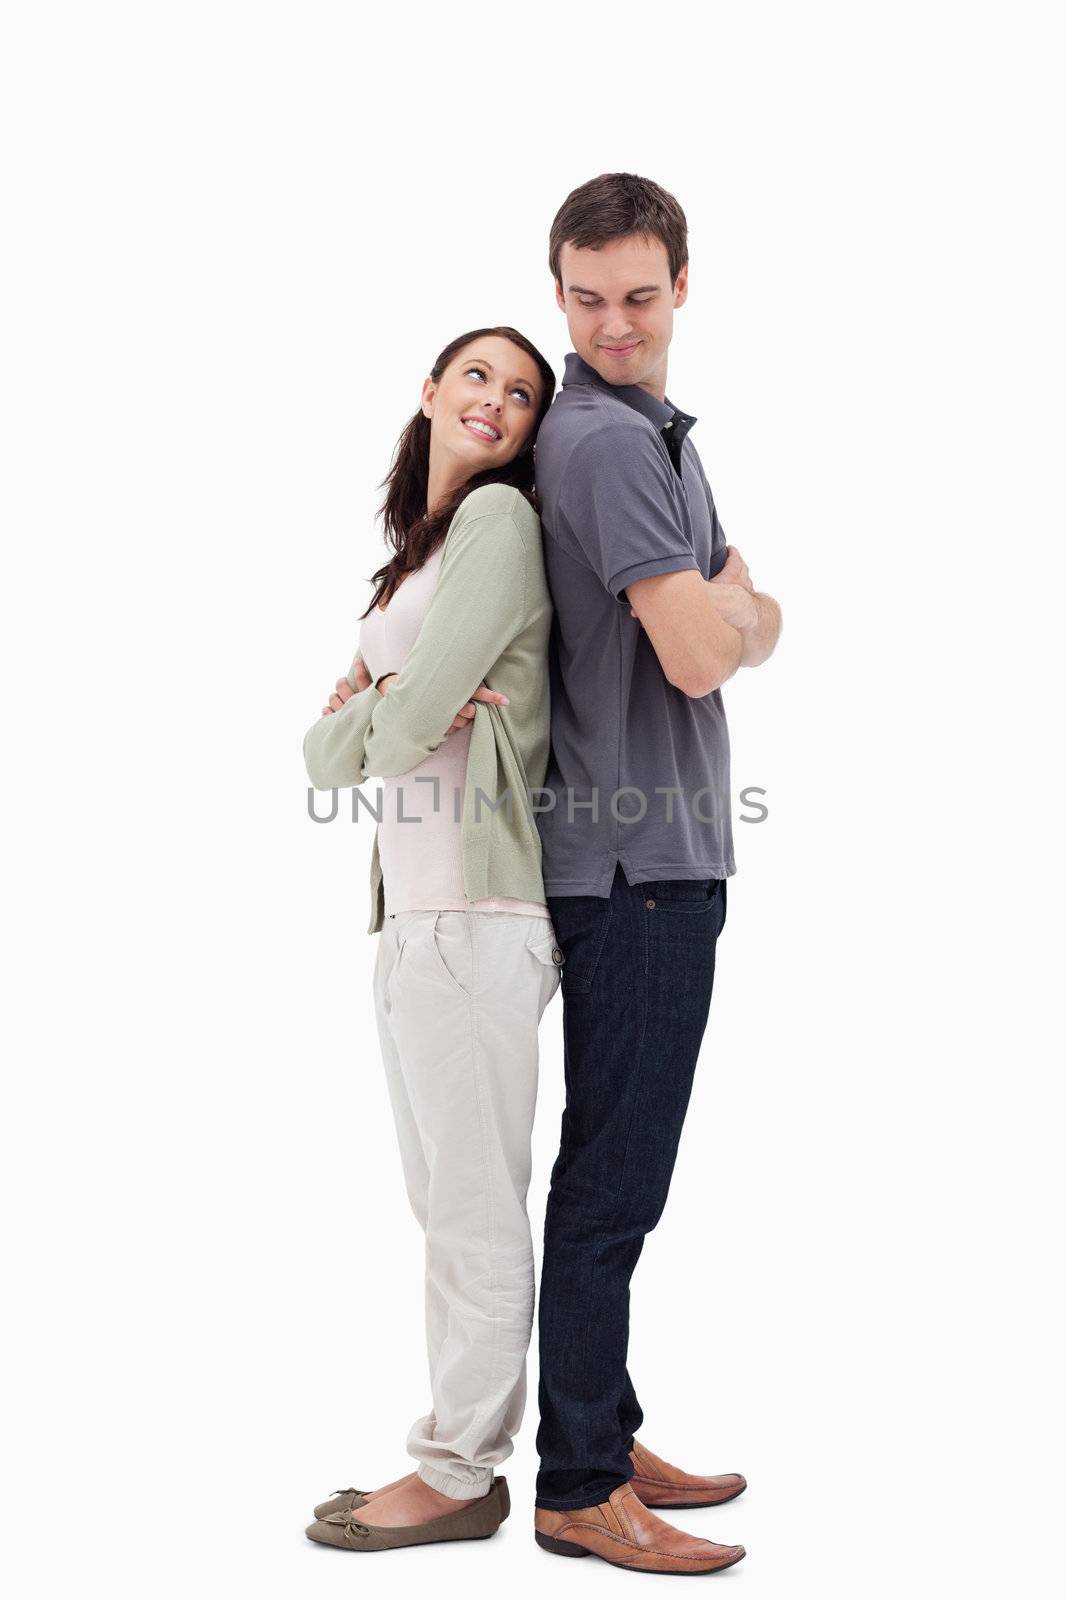 Couple back to back looking each other against white background